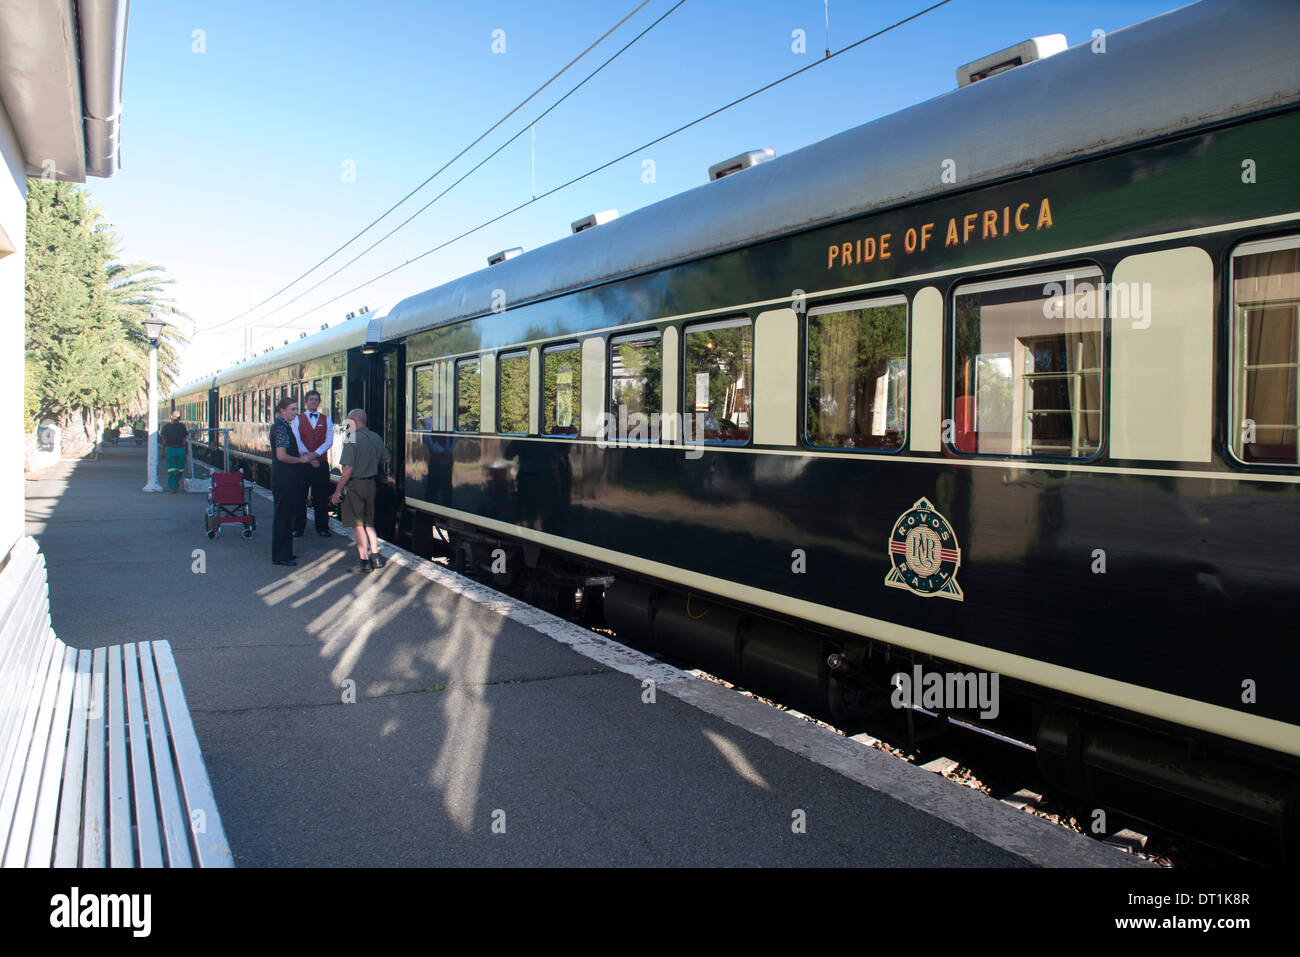 Pride of Africa Rovos train in Matjiesfontein, Western Cape, South Africa, Africa Stock Photo